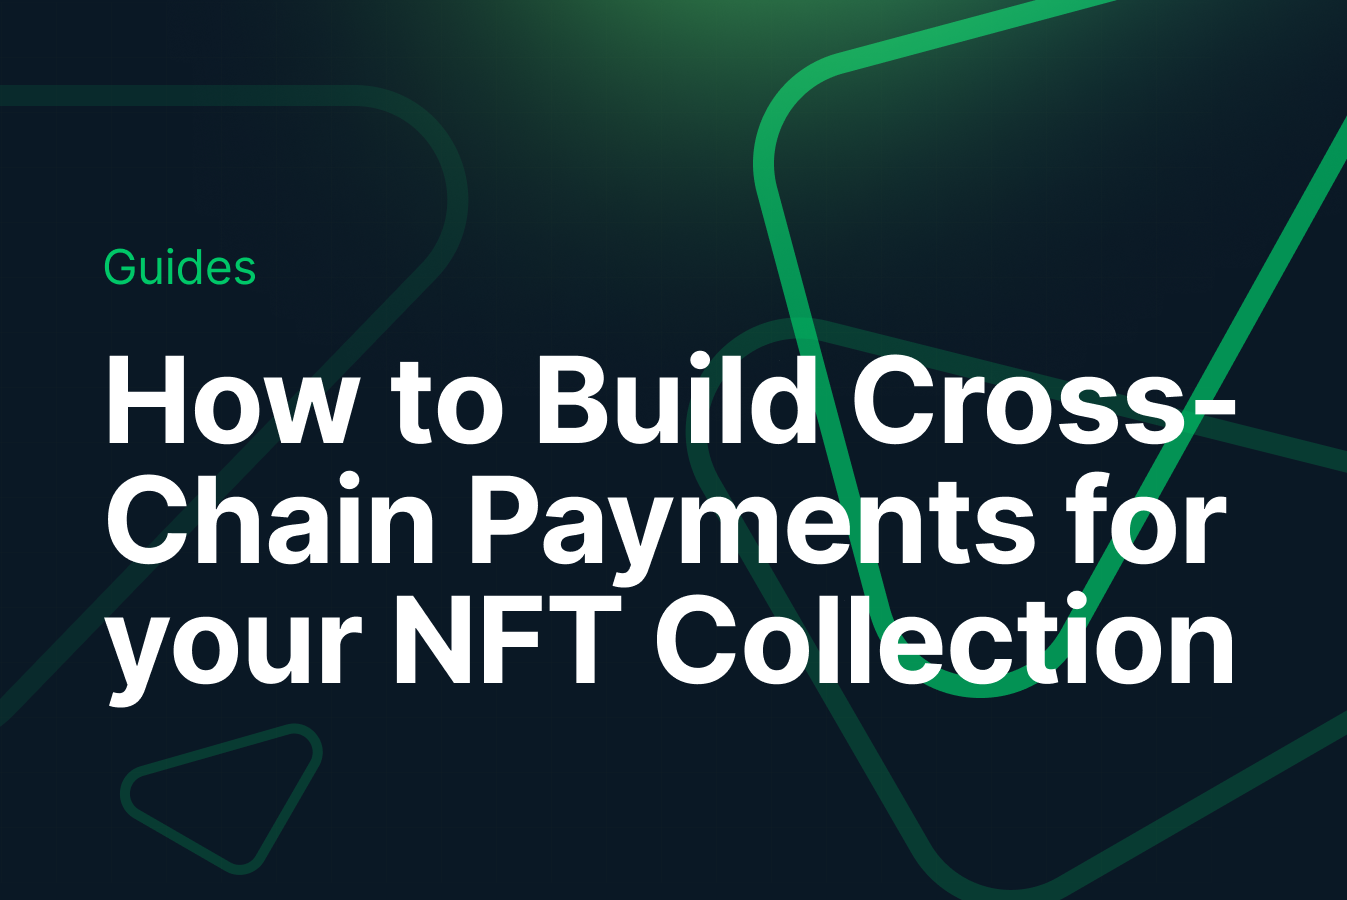 How to Build Cross-Chain Payments for your NFT Collection